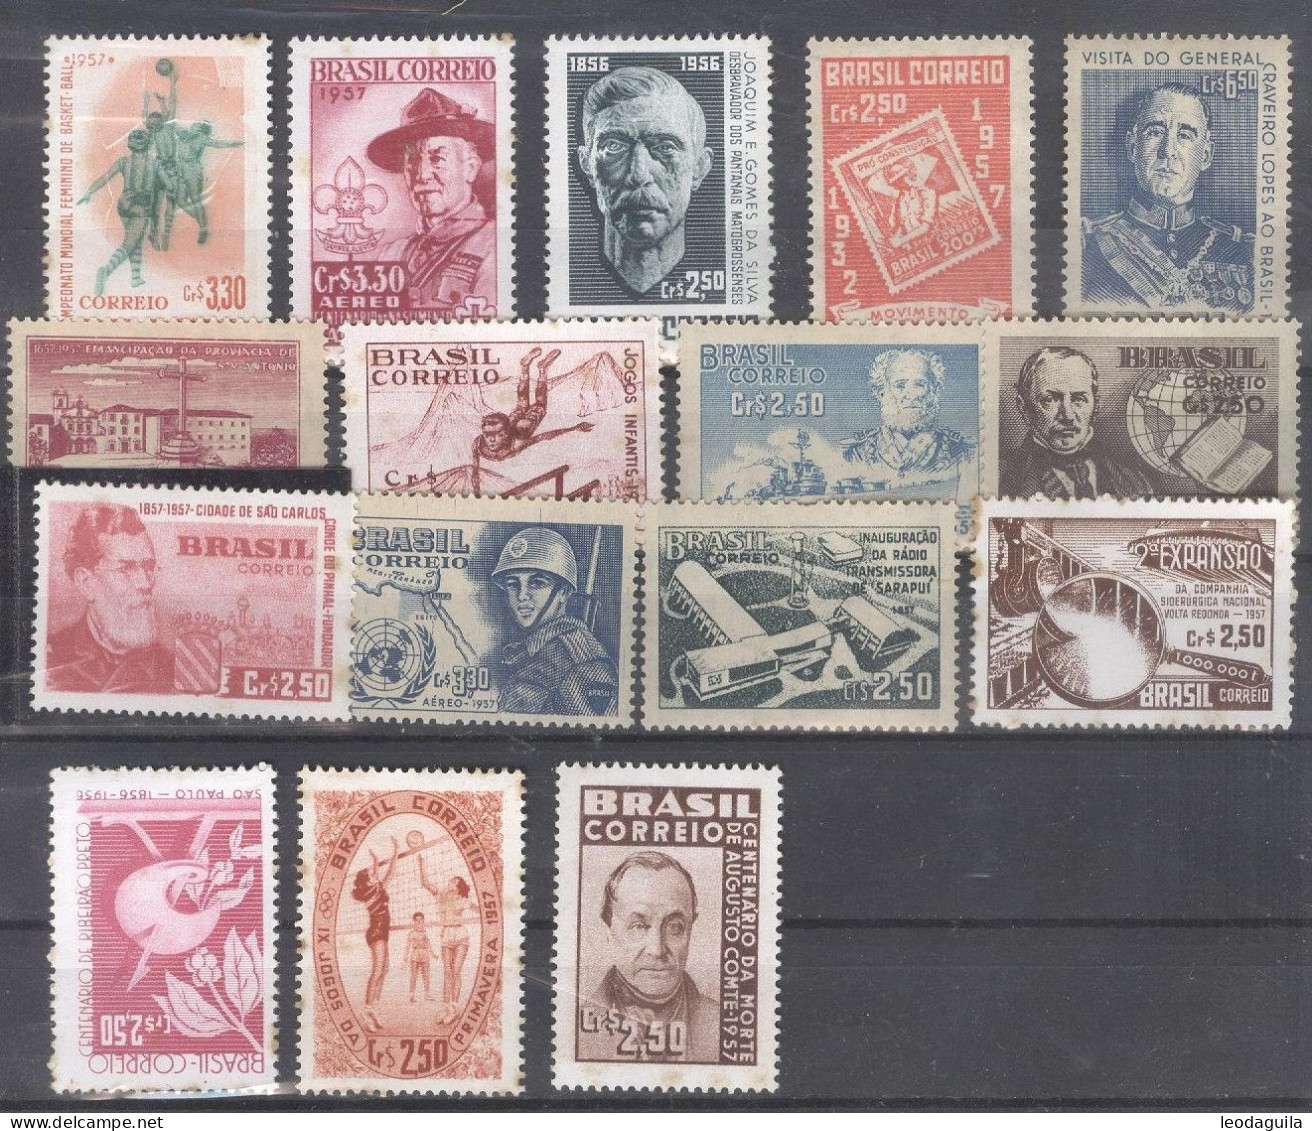 BRAZIL 1957   FULL YEAR COLLECTION  - 16 COMMEMORATIVES STAMPS  MINT - Années Complètes